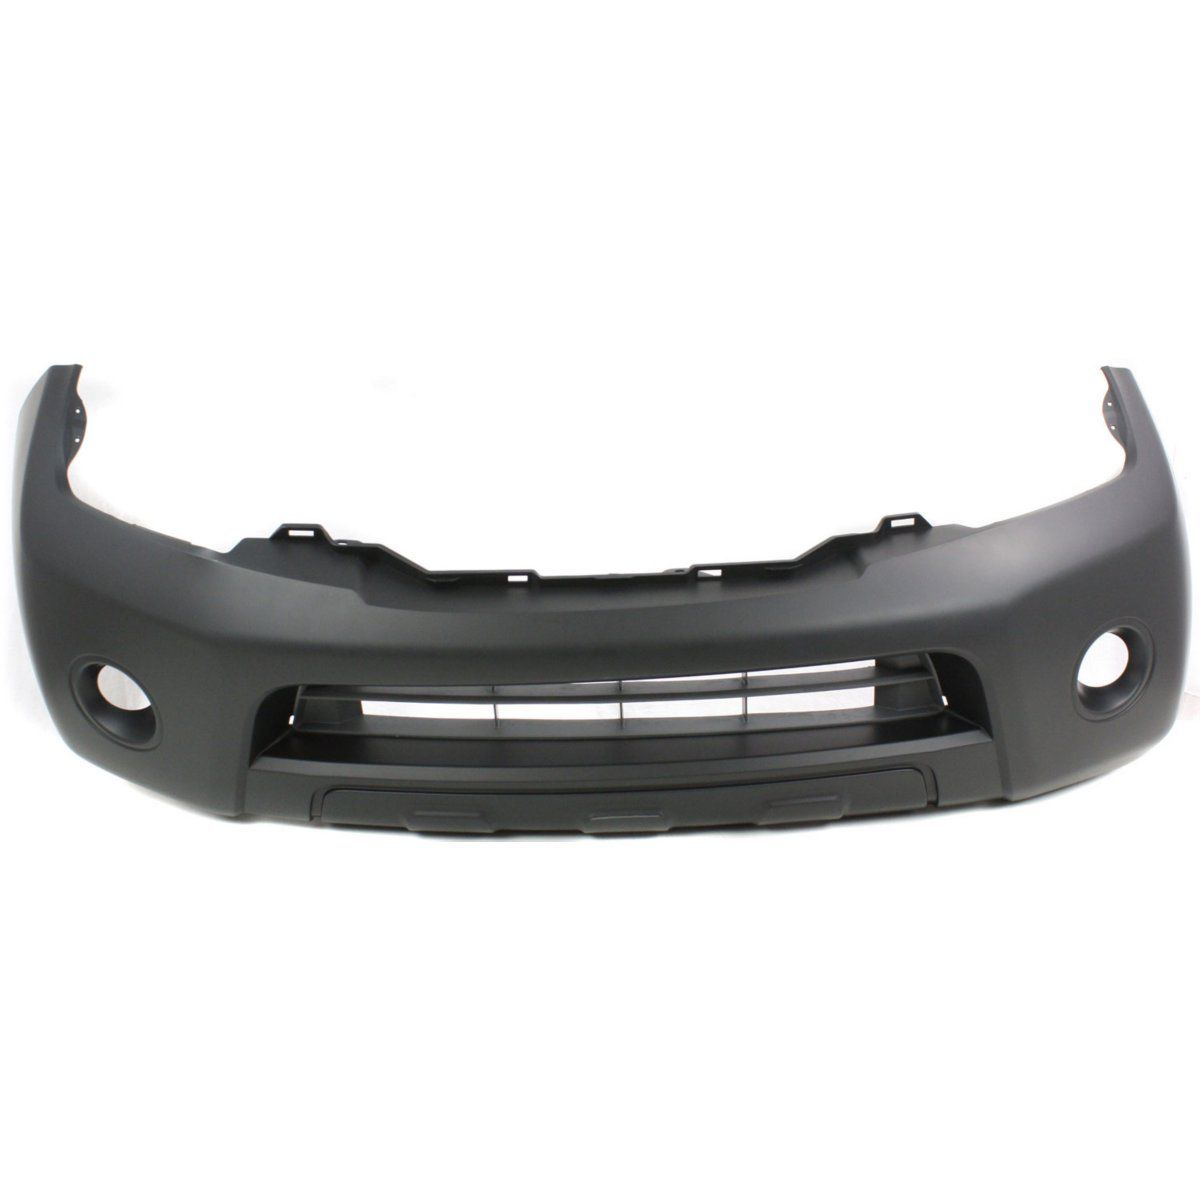 2008-2012 NISSAN PATHFINDER Front Bumper Cover S/SE Painted to Match